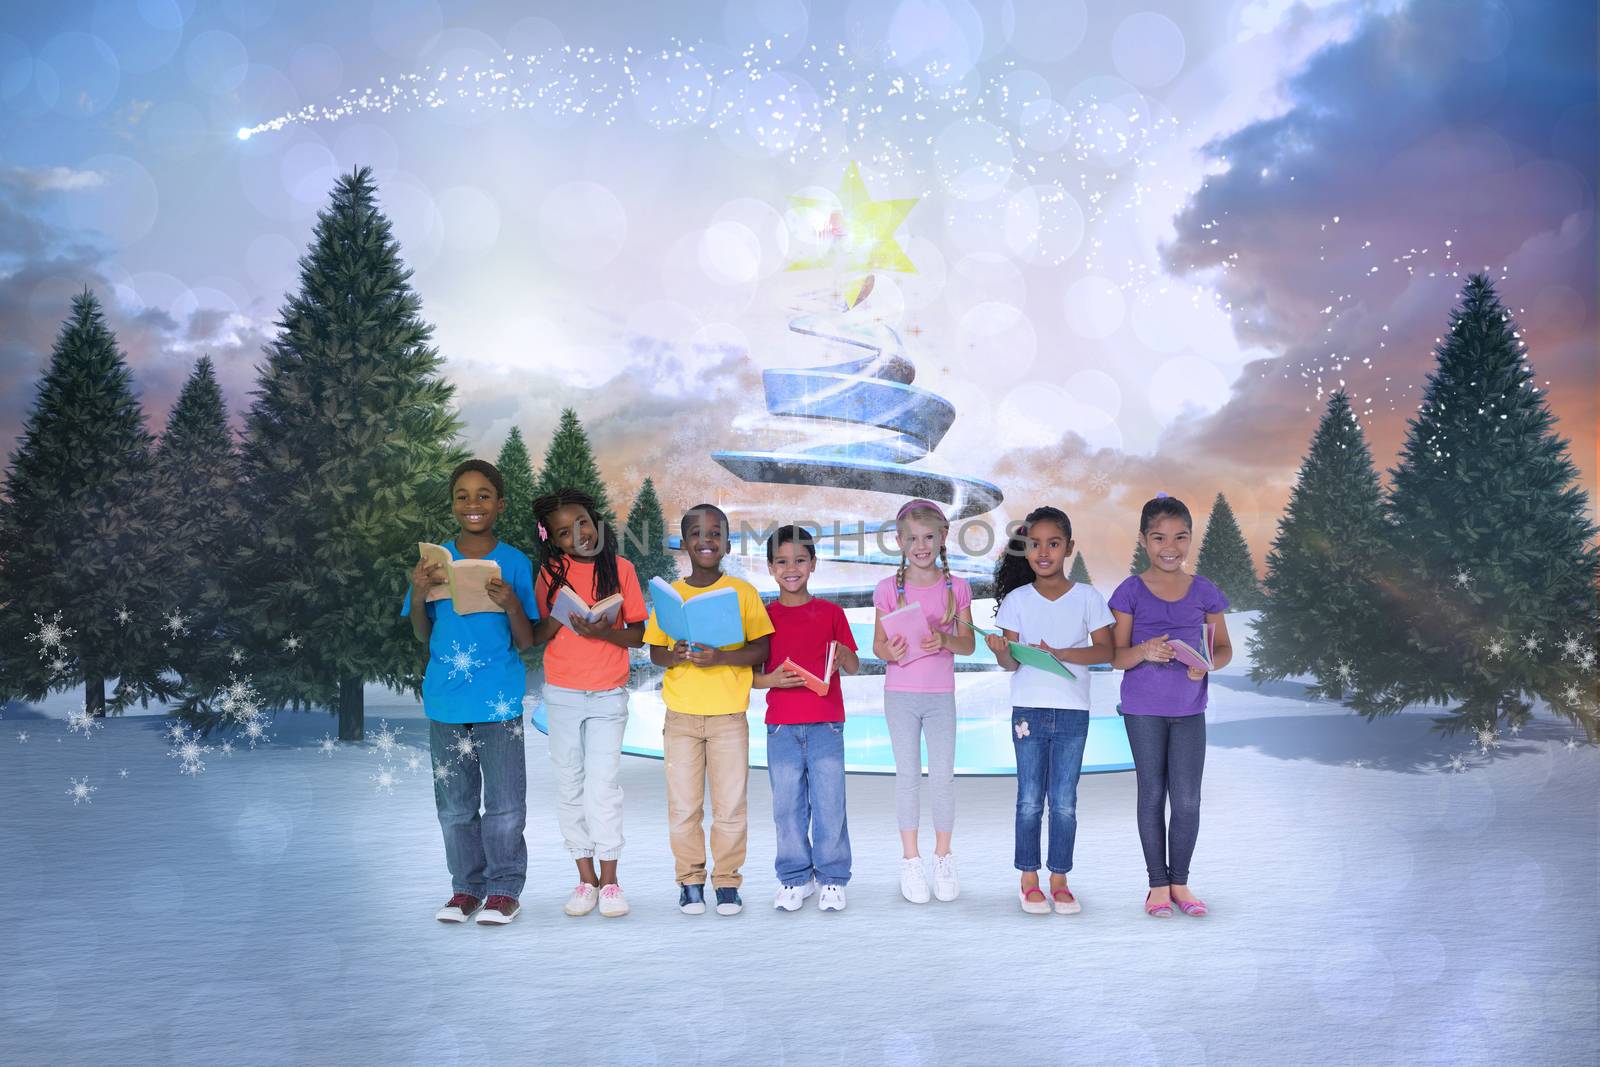 Composite image of cute children against snowy landscape with fir trees